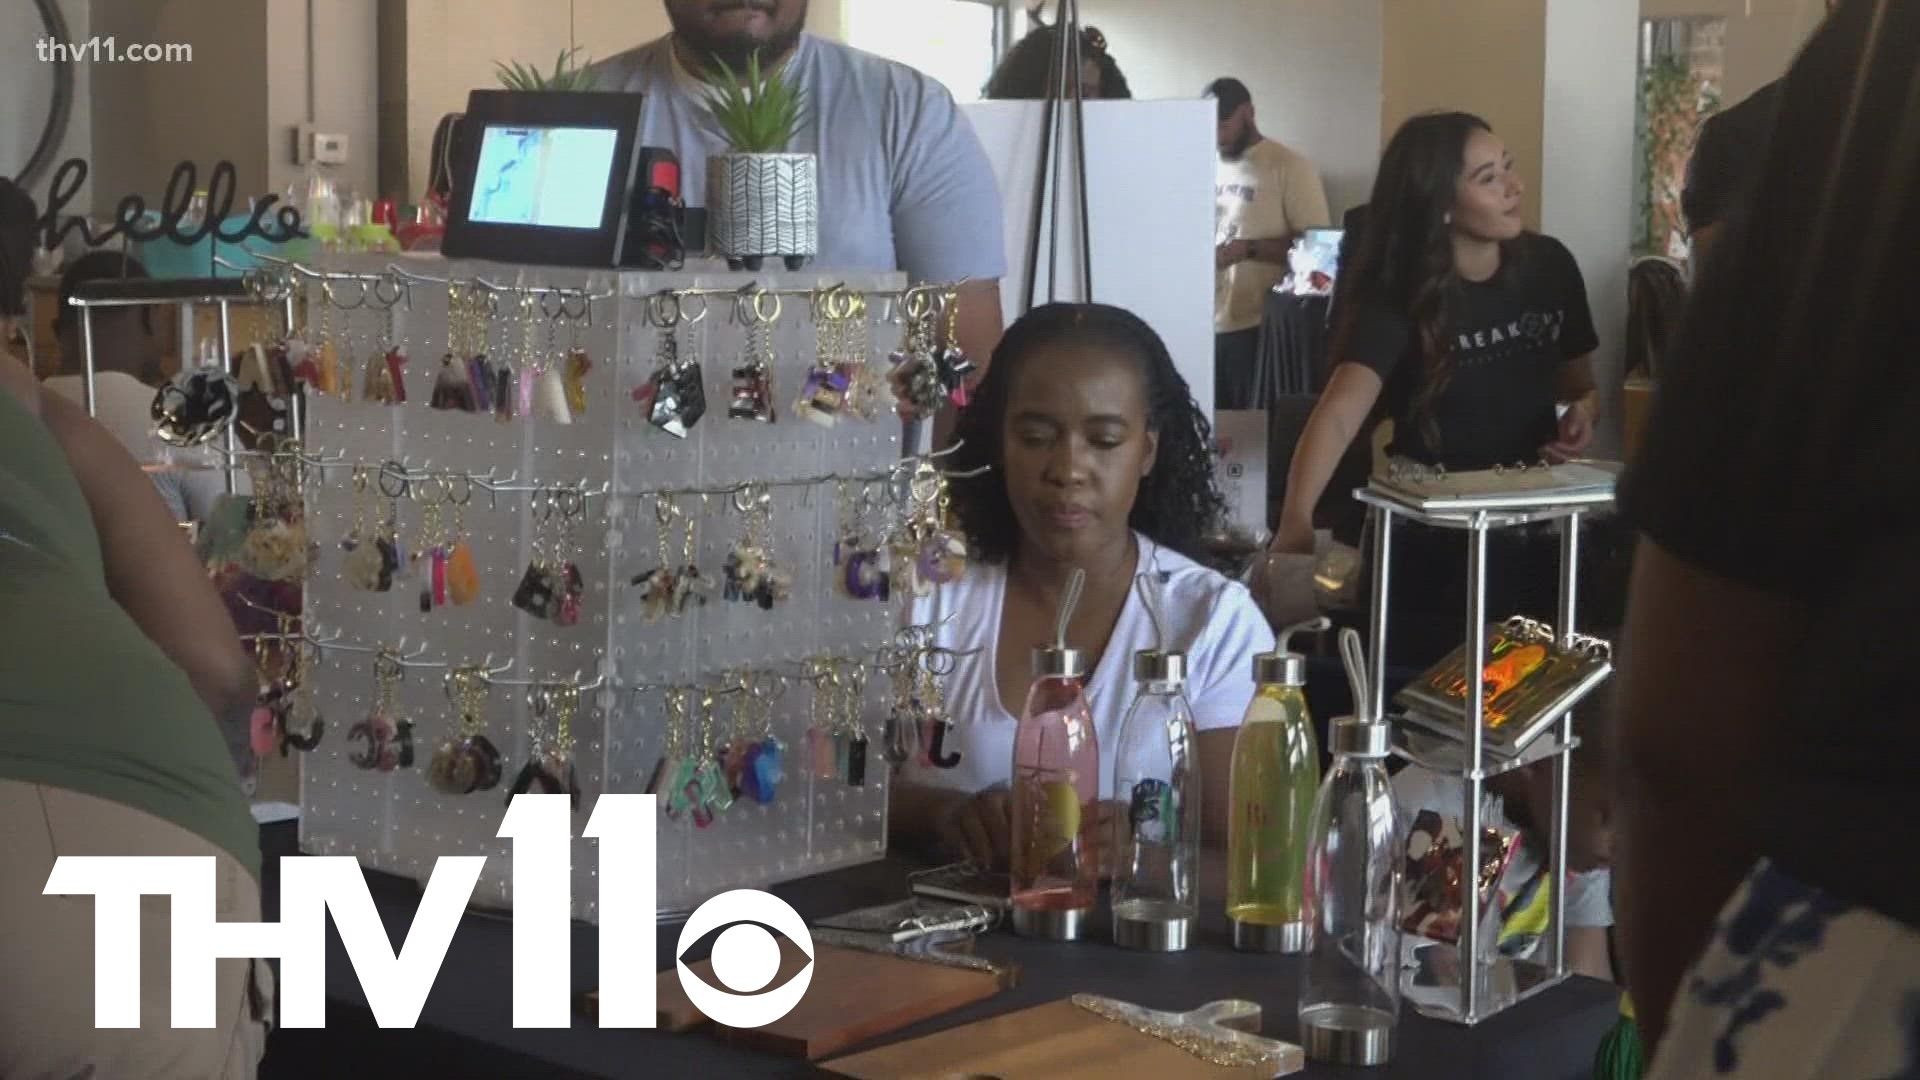 One person's idea to shine a light on companies like her own, planted a seed that grew into an expo -- featuring over 50 black owned businesses in Central Arkansas.